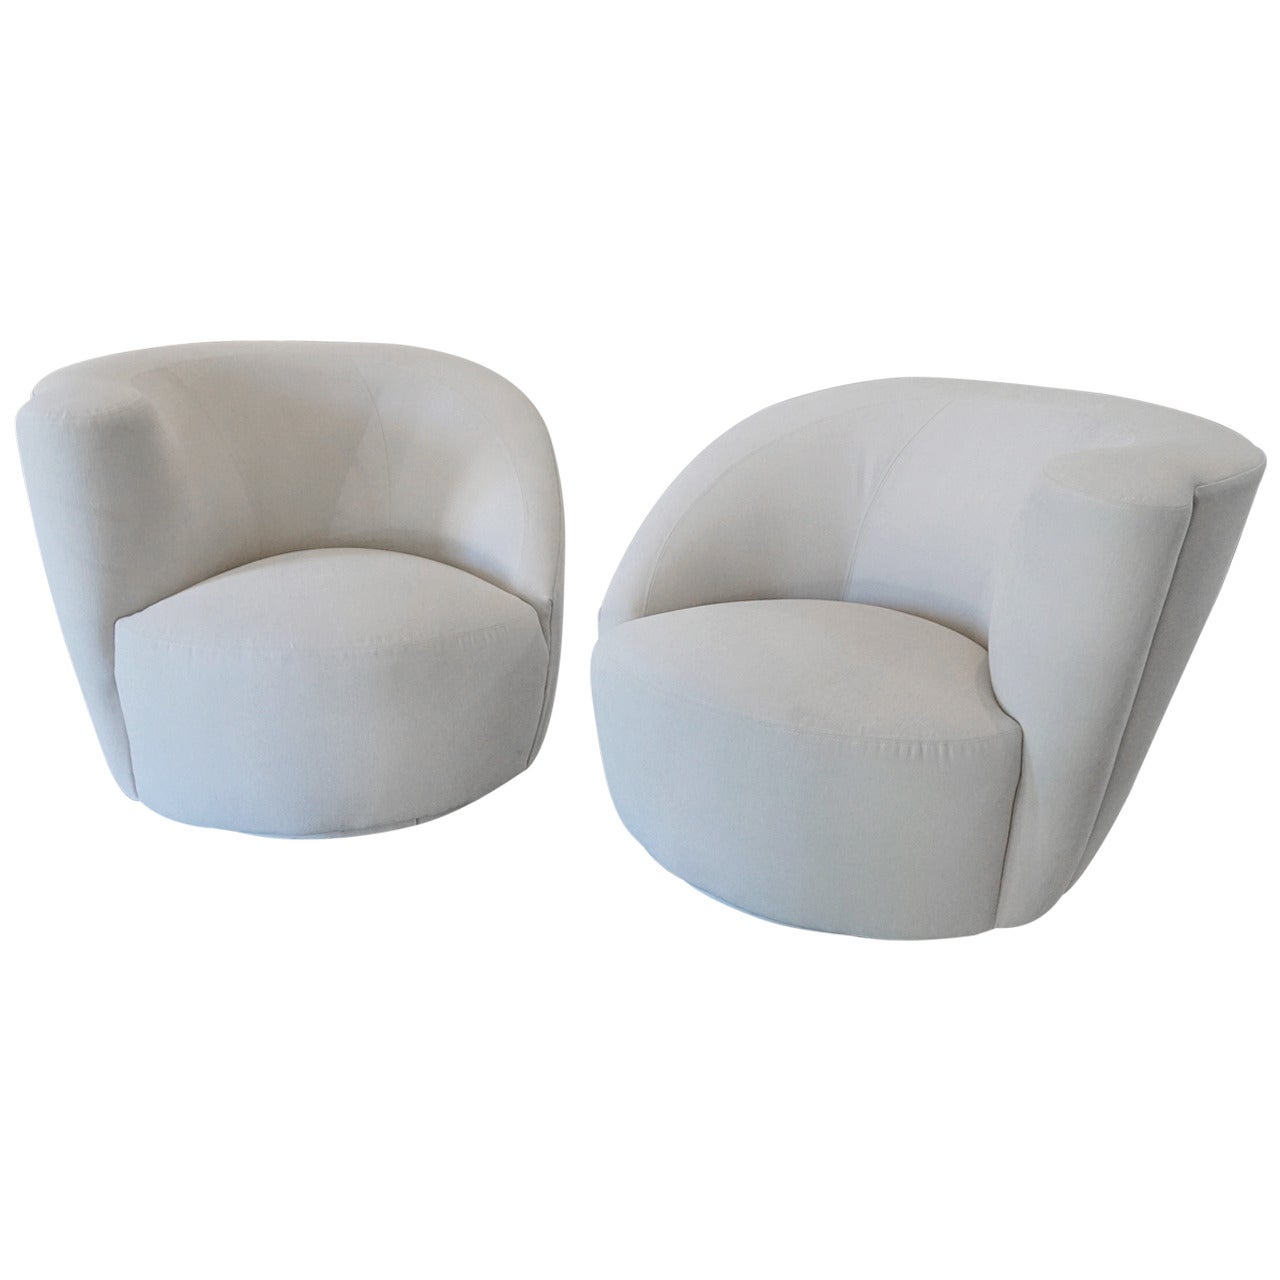 Pair of "Nautilus" Chairs by Vladimir Kagan for Directional